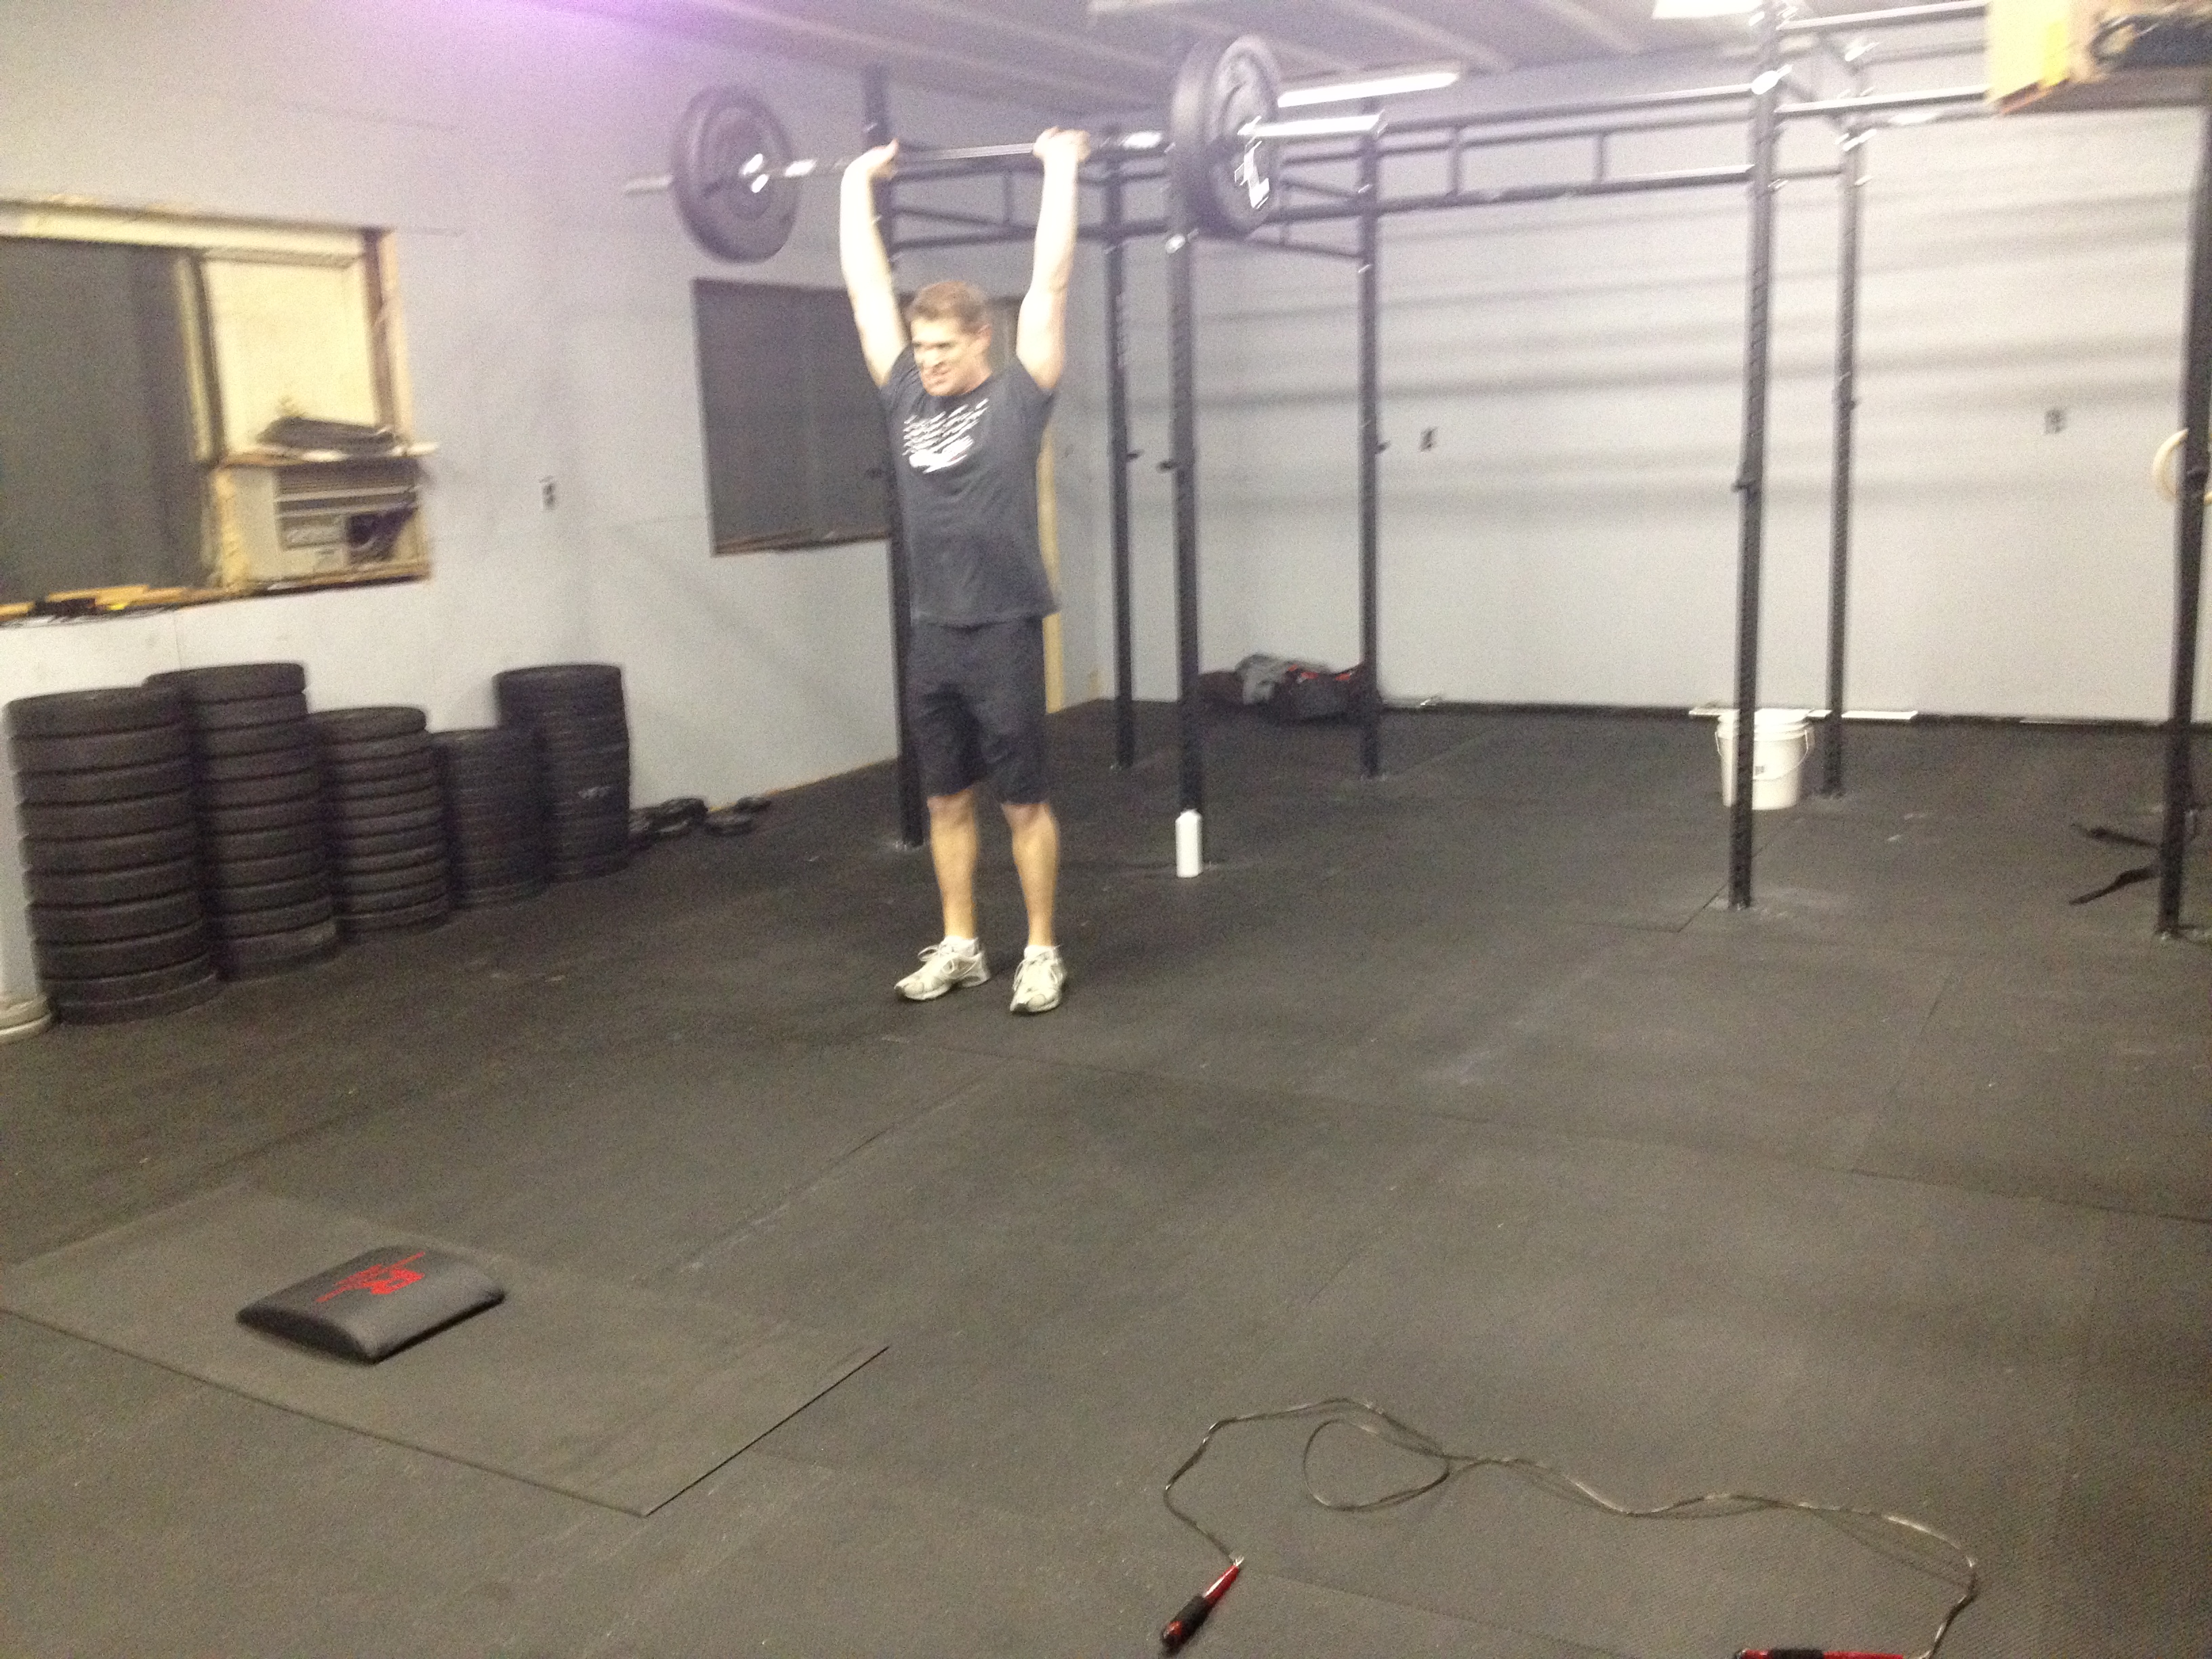 Athlete Development – “Getting good at the CrossFit”